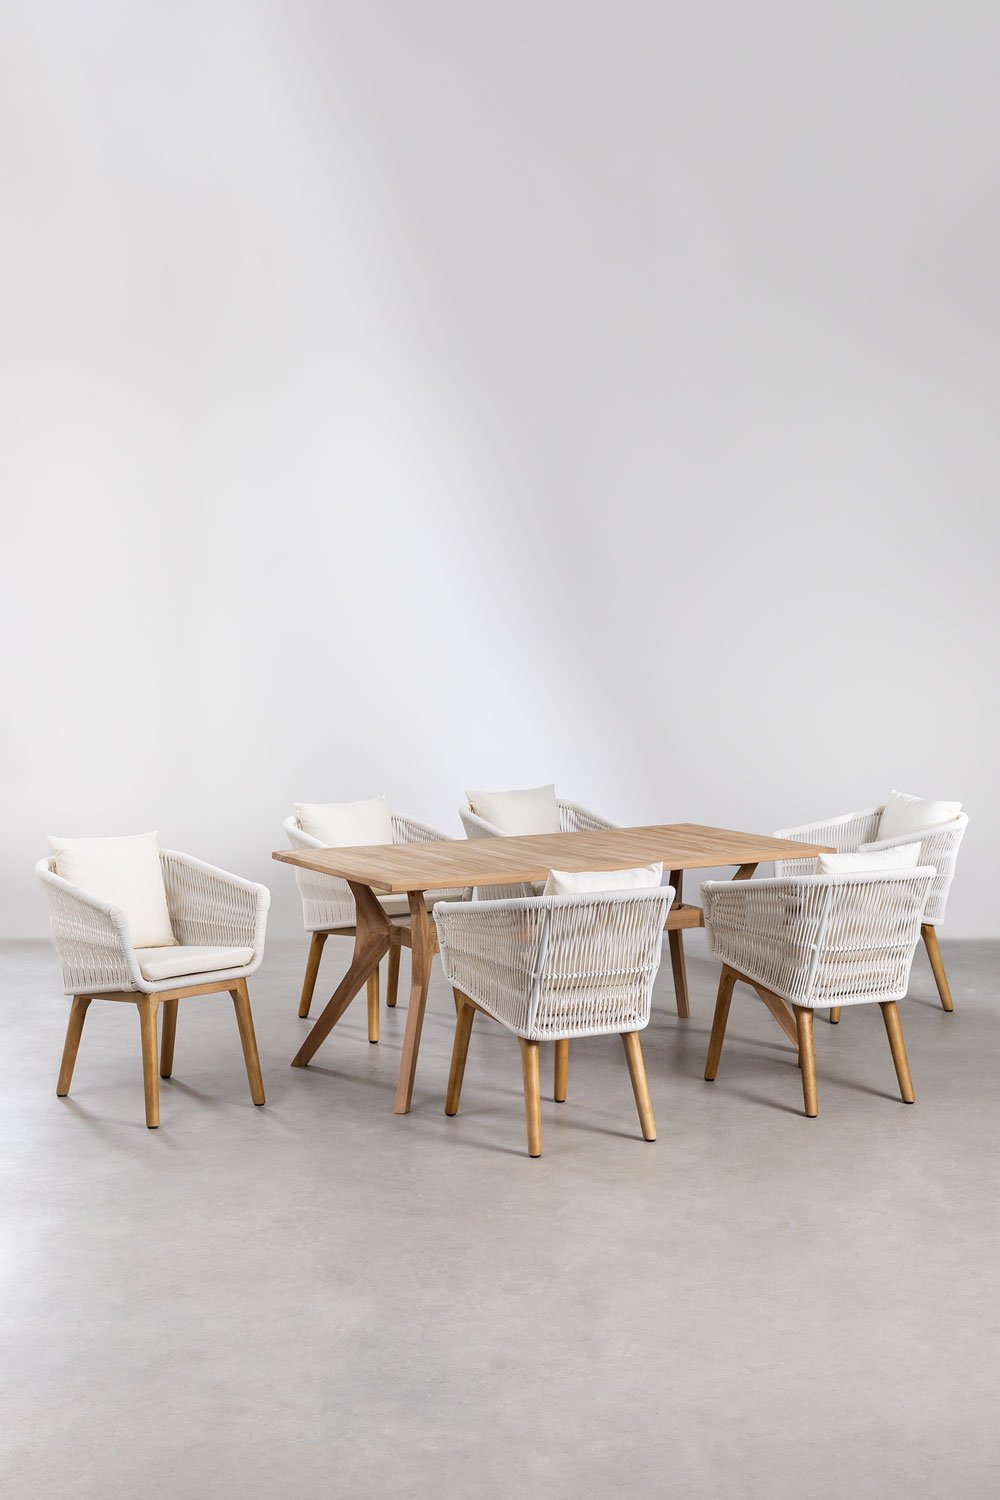 Yolen rectangular teak wood table set (180x90 cm) and 6 Barker dining chairs, gallery image 1